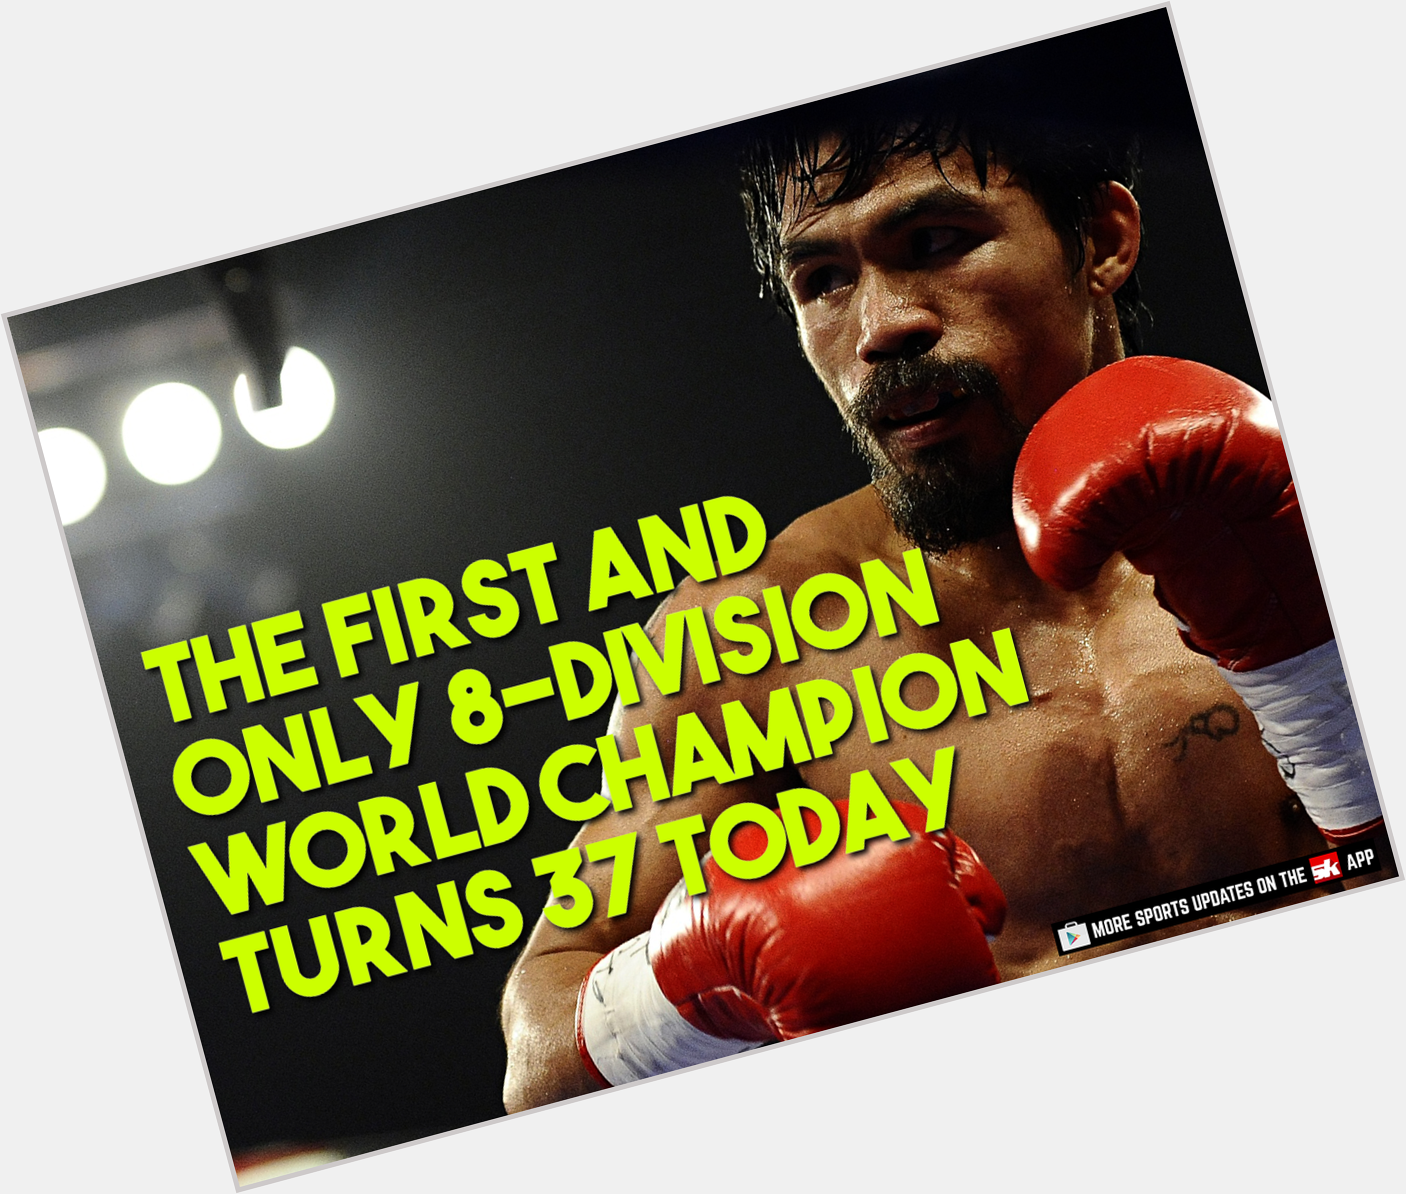 Here s wishing boxing legend, Manny Pacquiao a happy birthday! 